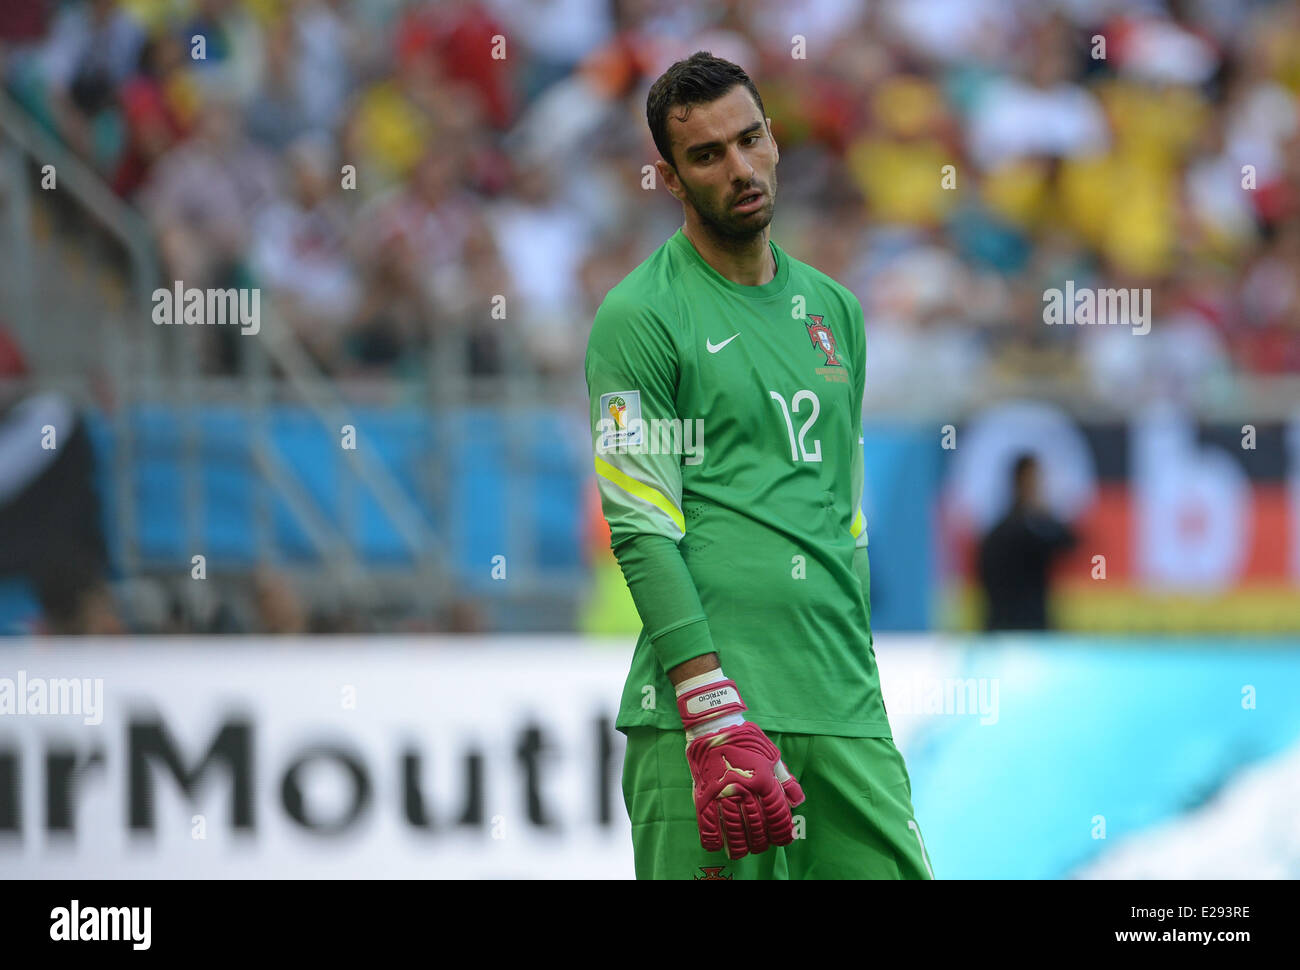 Salvador da Bahia, Brazil. 16th June, 2014. Goalkeeper Rui Patricio of Portugal reacts during the FIFA World Cup 2014 group G preliminary round match between Germany and Portugal at the Arena Fonte Nova in Salvador da Bahia, Brazil, 16 June 2014. The FIFA World Cup 2014 will take place in Brazil from 12 June to 13 July 2014. © dpa picture alliance/Alamy Live News Credit:  dpa picture alliance/Alamy Live News Stock Photo